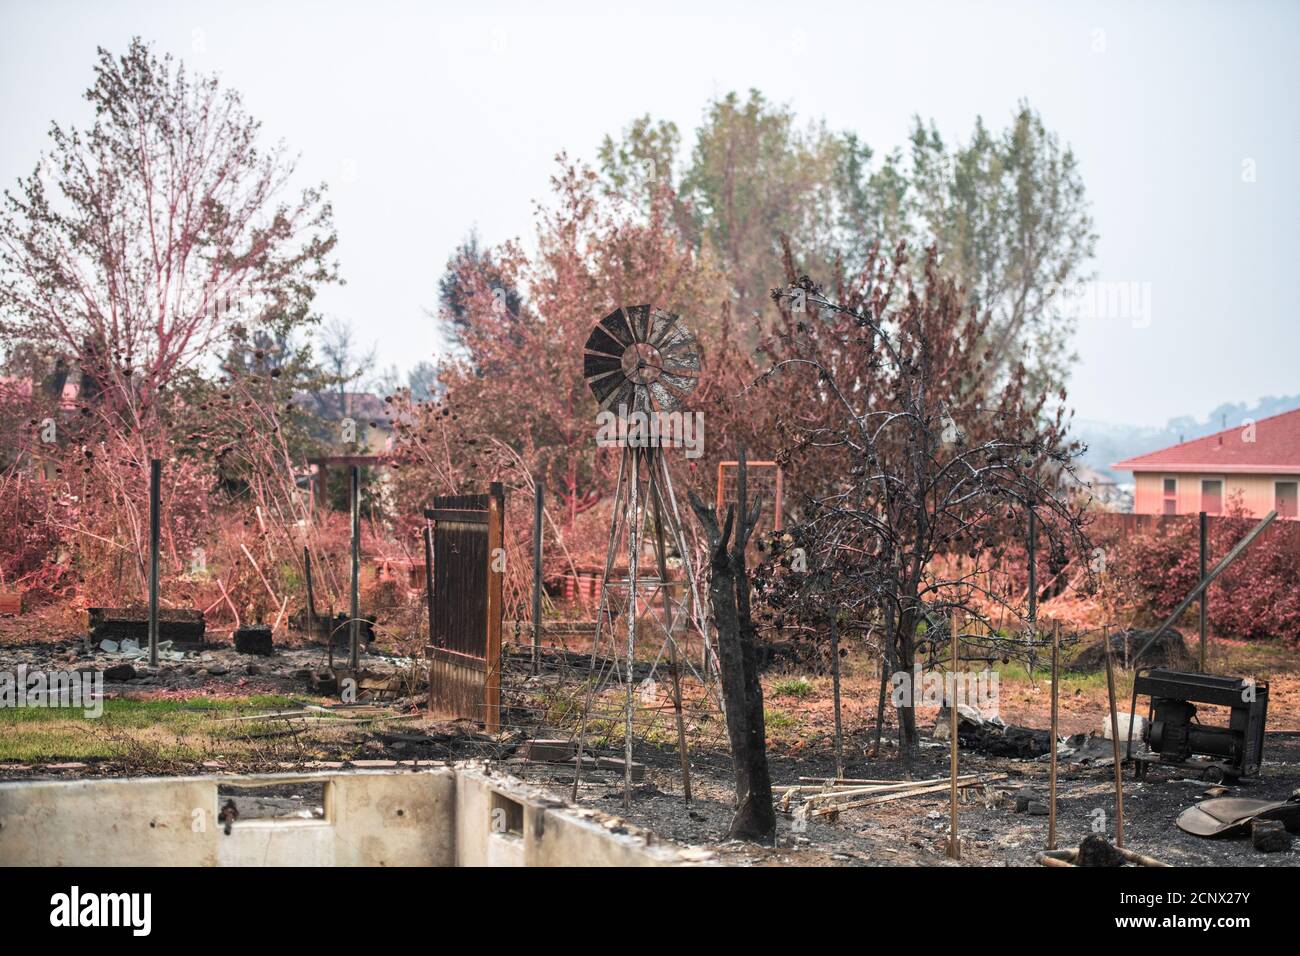 TALENT, ORE - SEPTEMBER 18, 2020: A general view of the Talent Mobile Estates #81 which were sprayed with fire retardent during the Almeda Fire. The town of Talent, Oregon, showing the burned out homes, cars and rubble left behind. In Talent, about 20 miles north of the California border, homes were charred beyond recognition. Across the western US, at least 87 wildfires are burning, according to the National Interagency Fire Center. They've torched more than 4.7 million acres -- more than six times the area of Rhode Island. Credit: Chris Tuite/imageSPACE Stock Photo